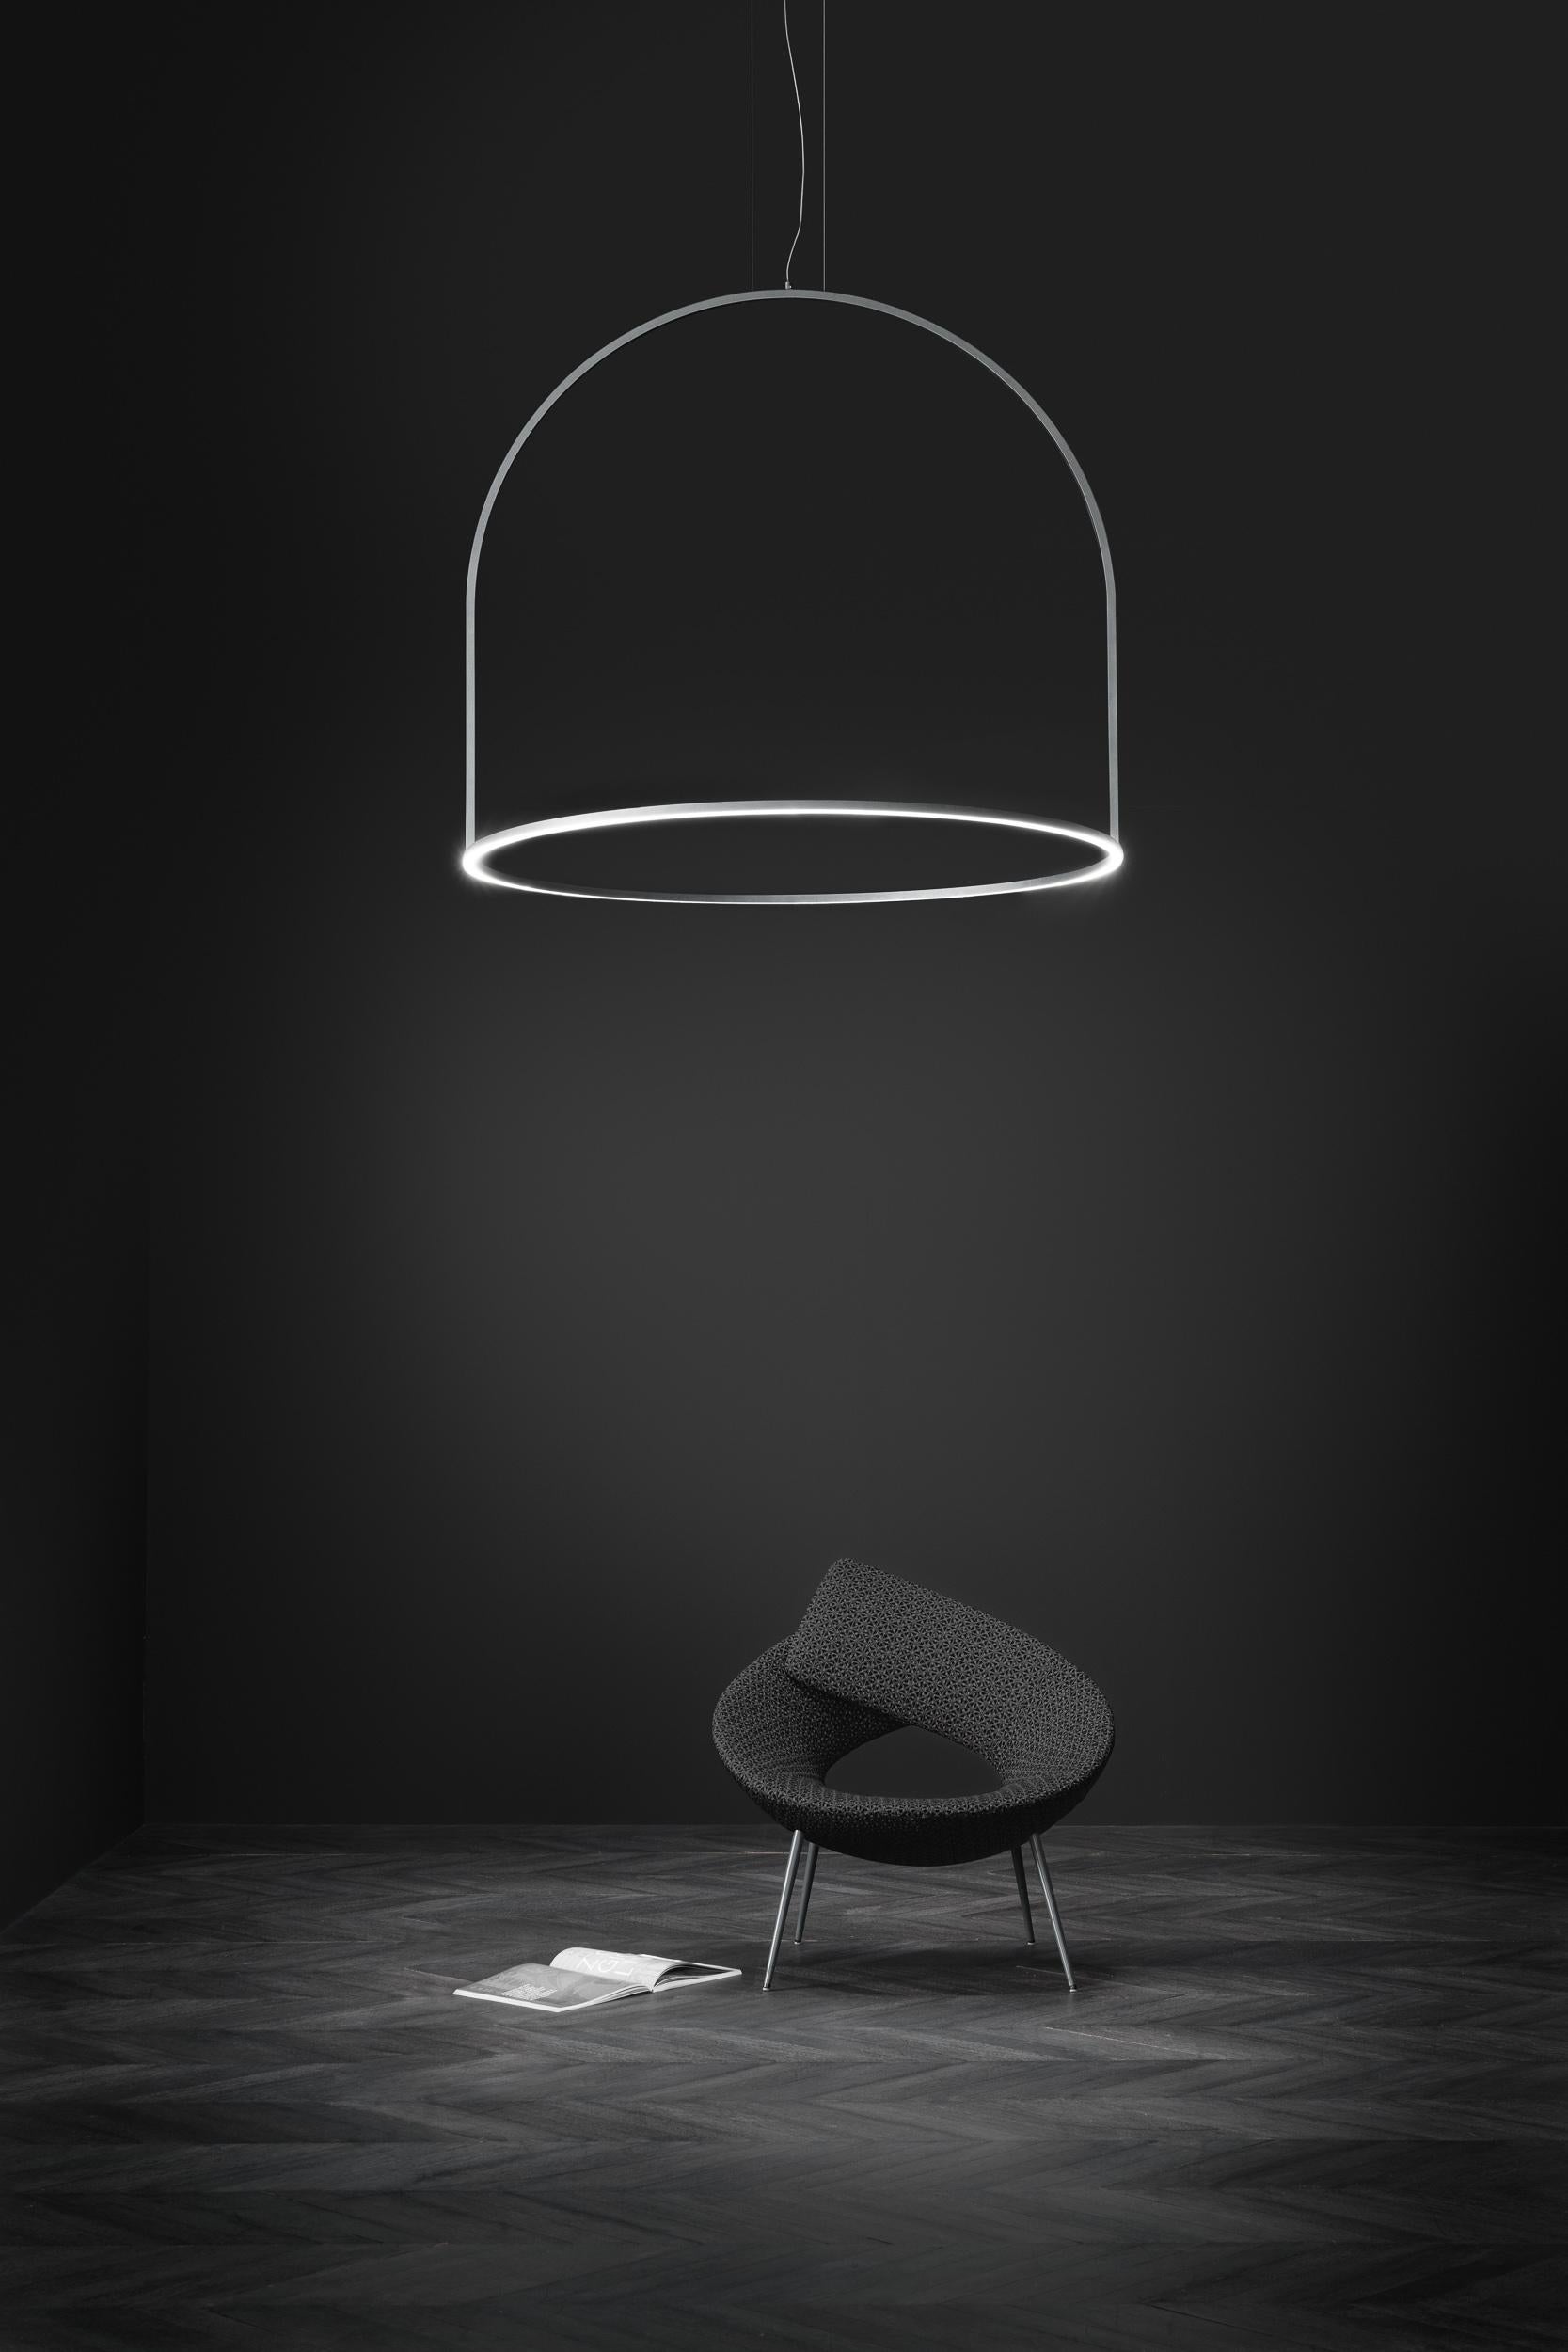 Iconic and high performing, the U-Light collection by Timo Ripatti is a graphic sculpture of circular aluminum elements, minimal and light, that decorate ceilings and walls. Representative of a craftsmanship and cutting-edge technology, all models